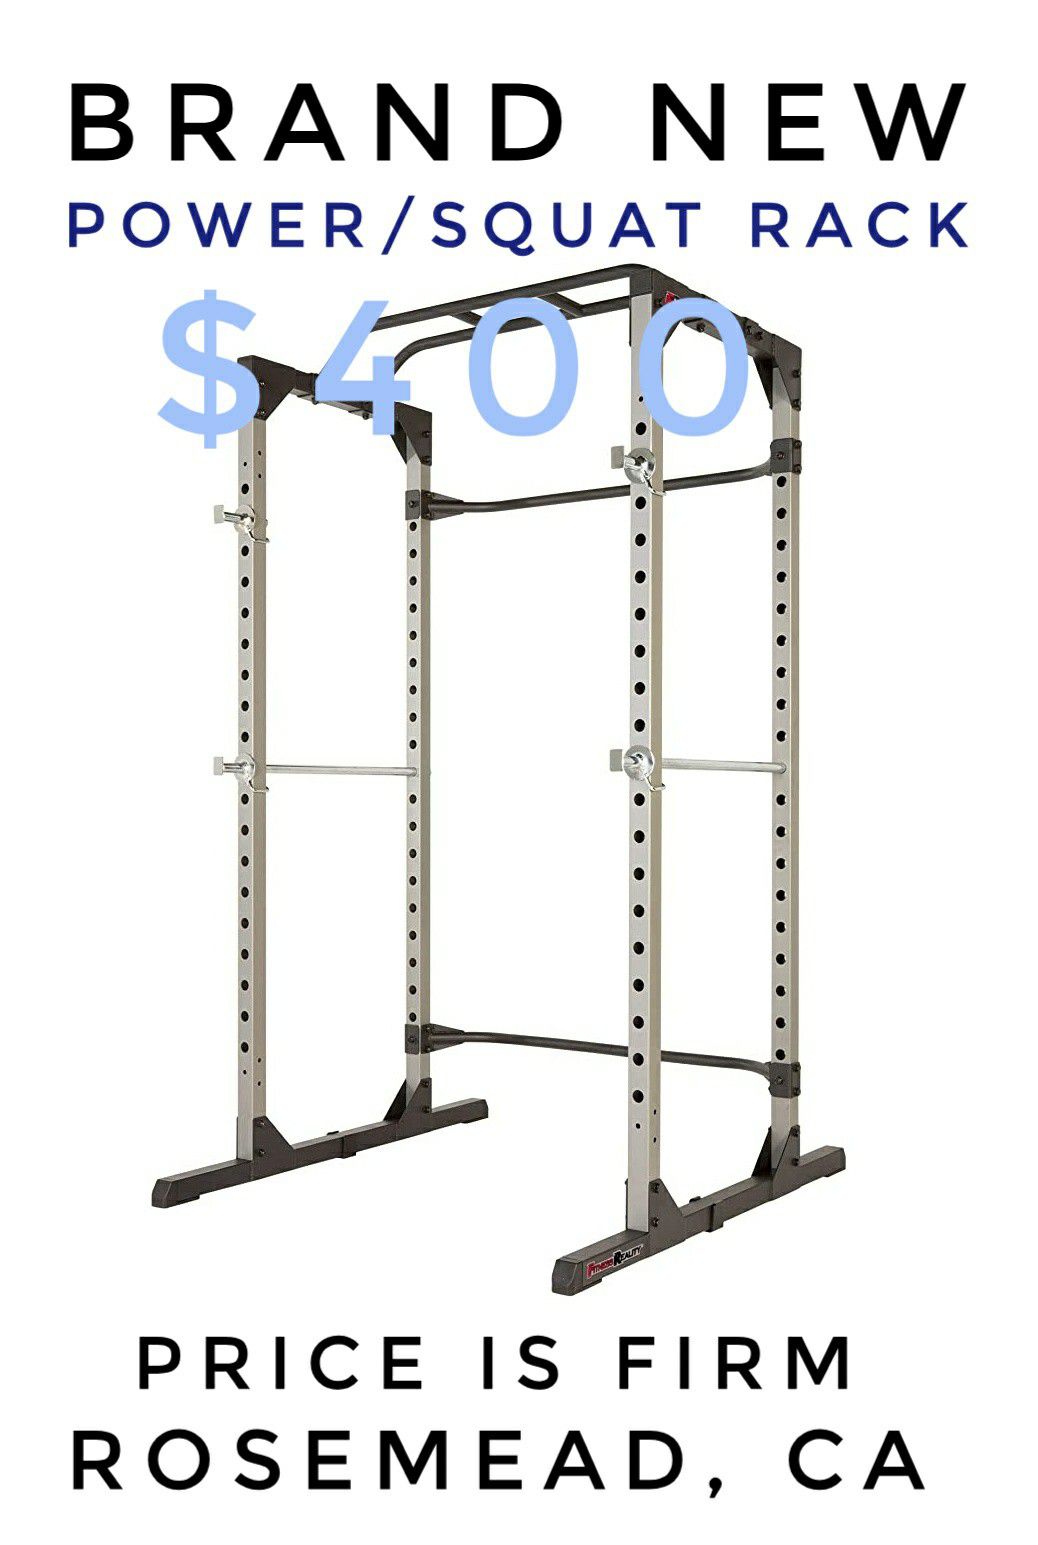 ProGear 1600 / Fitness Reality Super Max Power Cage Full Squat Rack Bench Press, bench sold separately